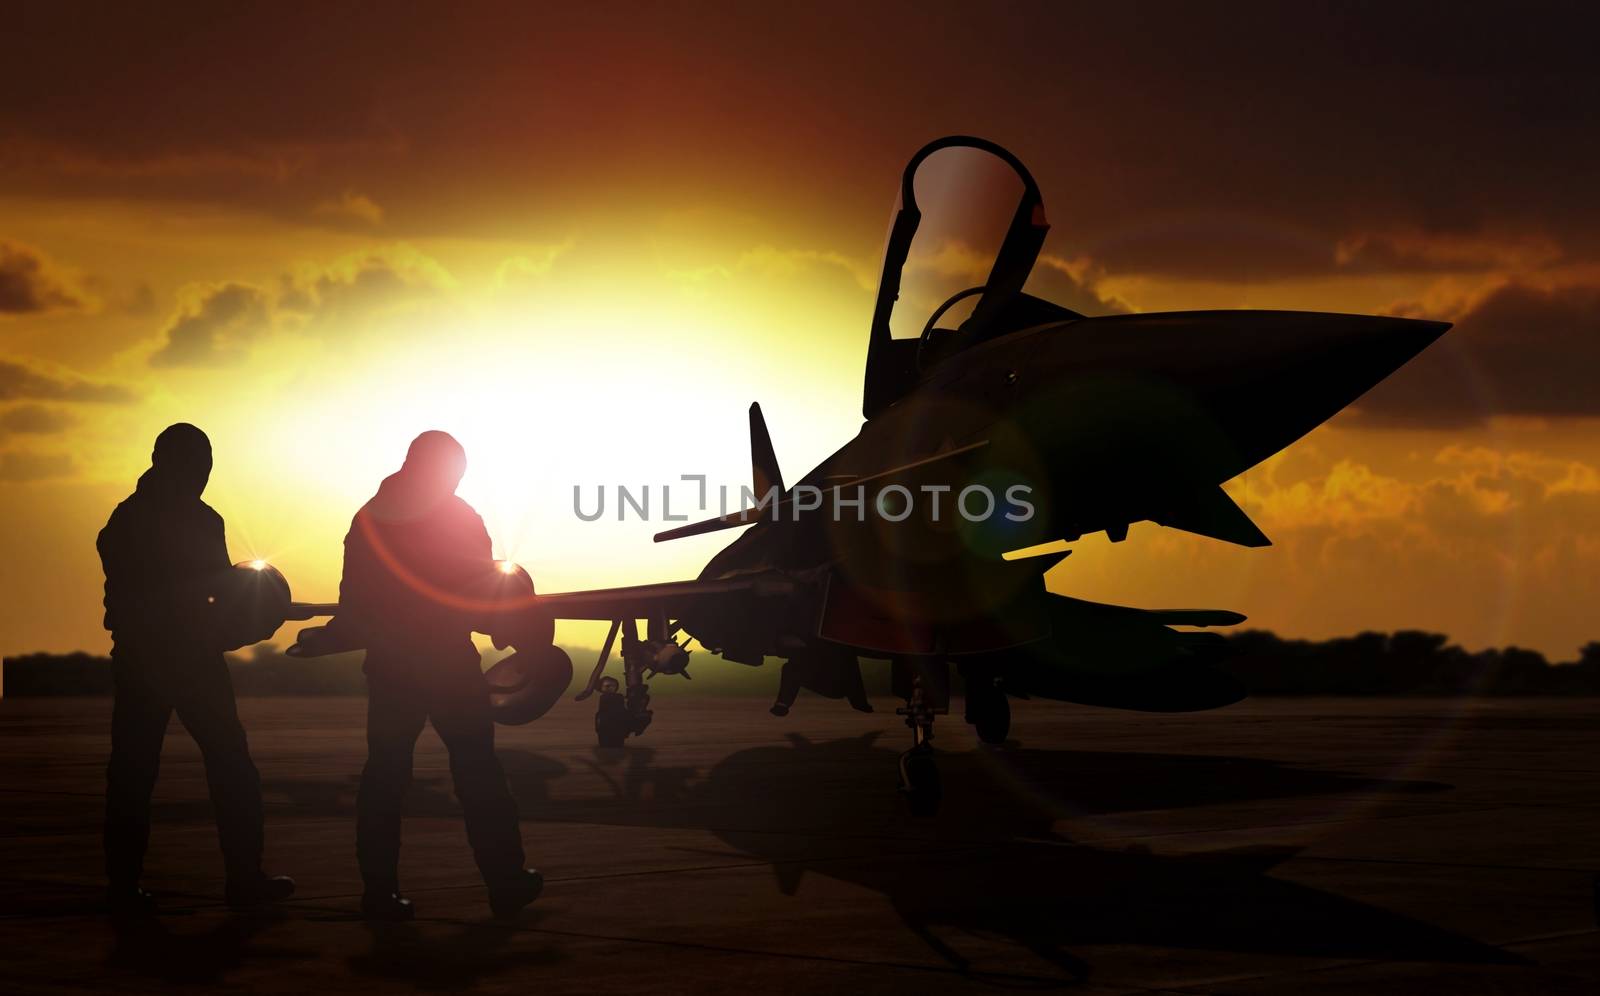 military aircraft on airfield with pilot walking towards the aircraft